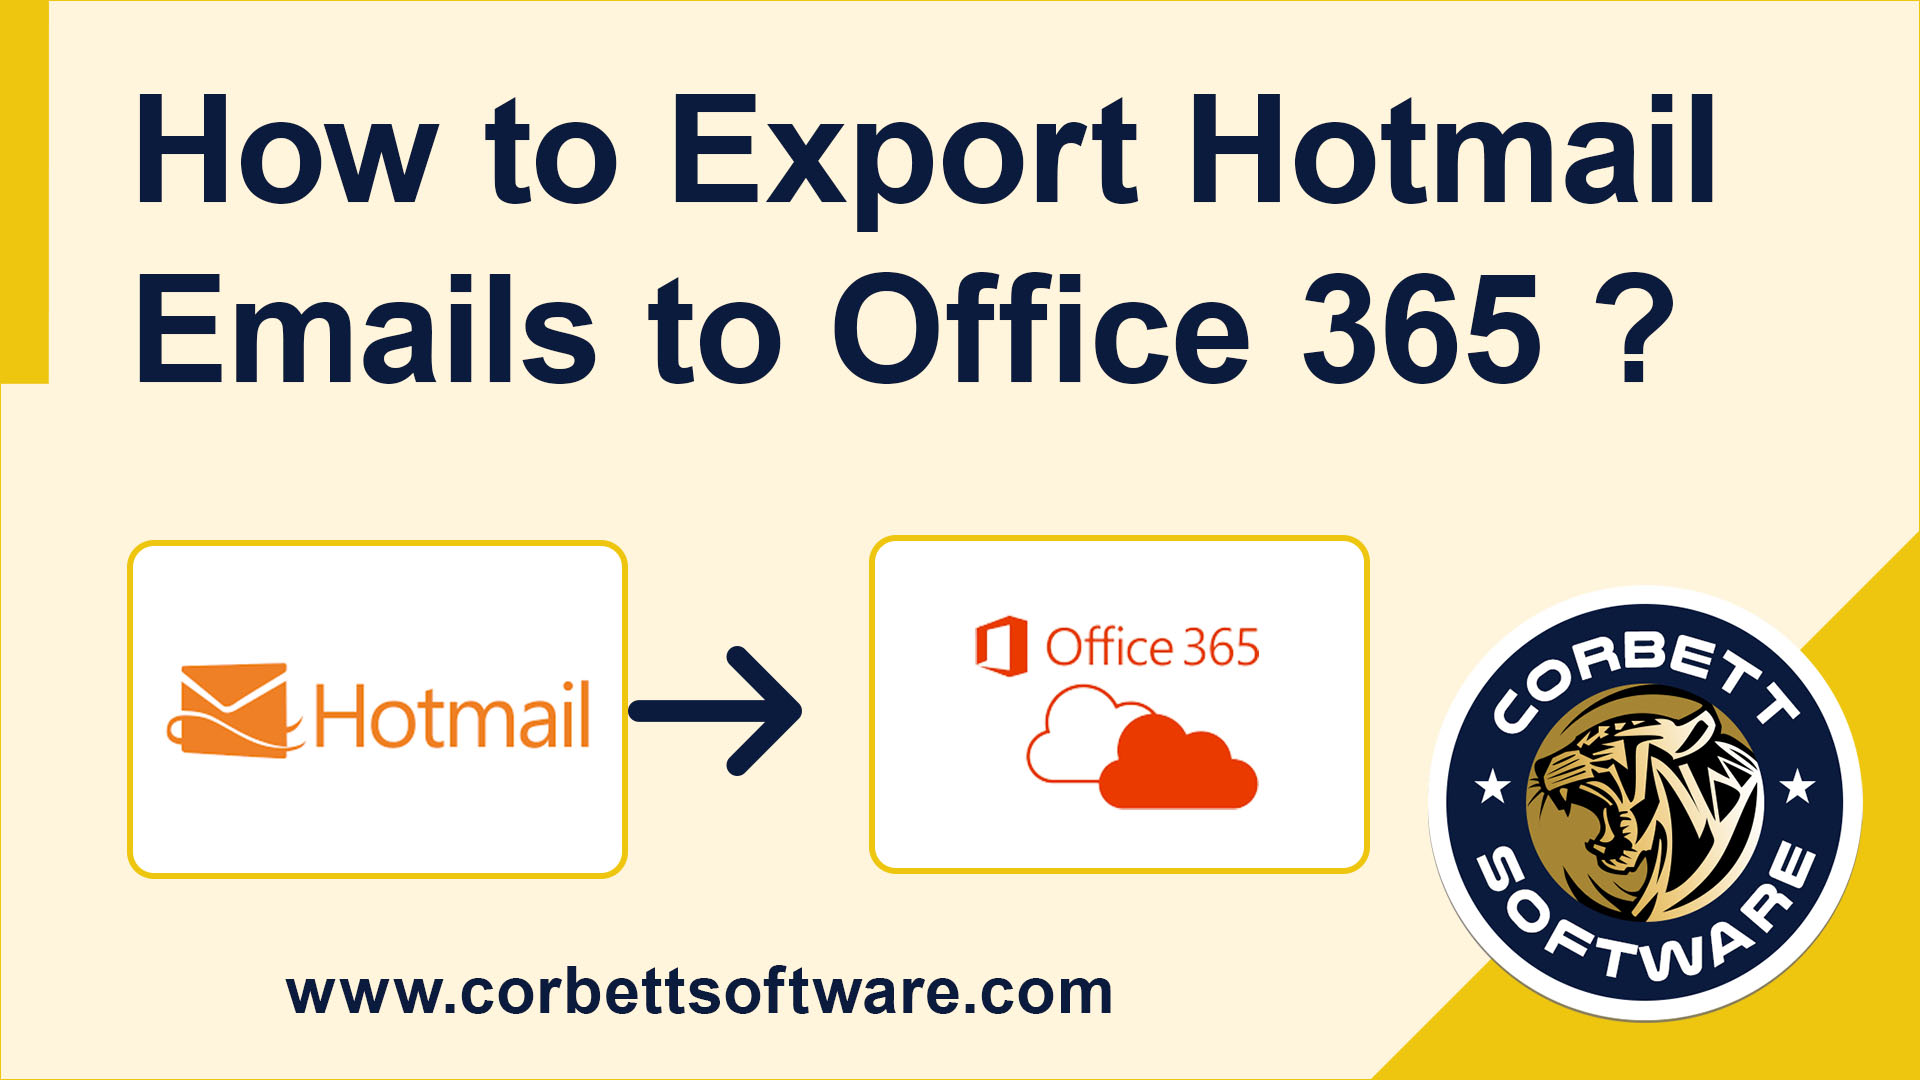 Export Hotmail Emails to Office 365